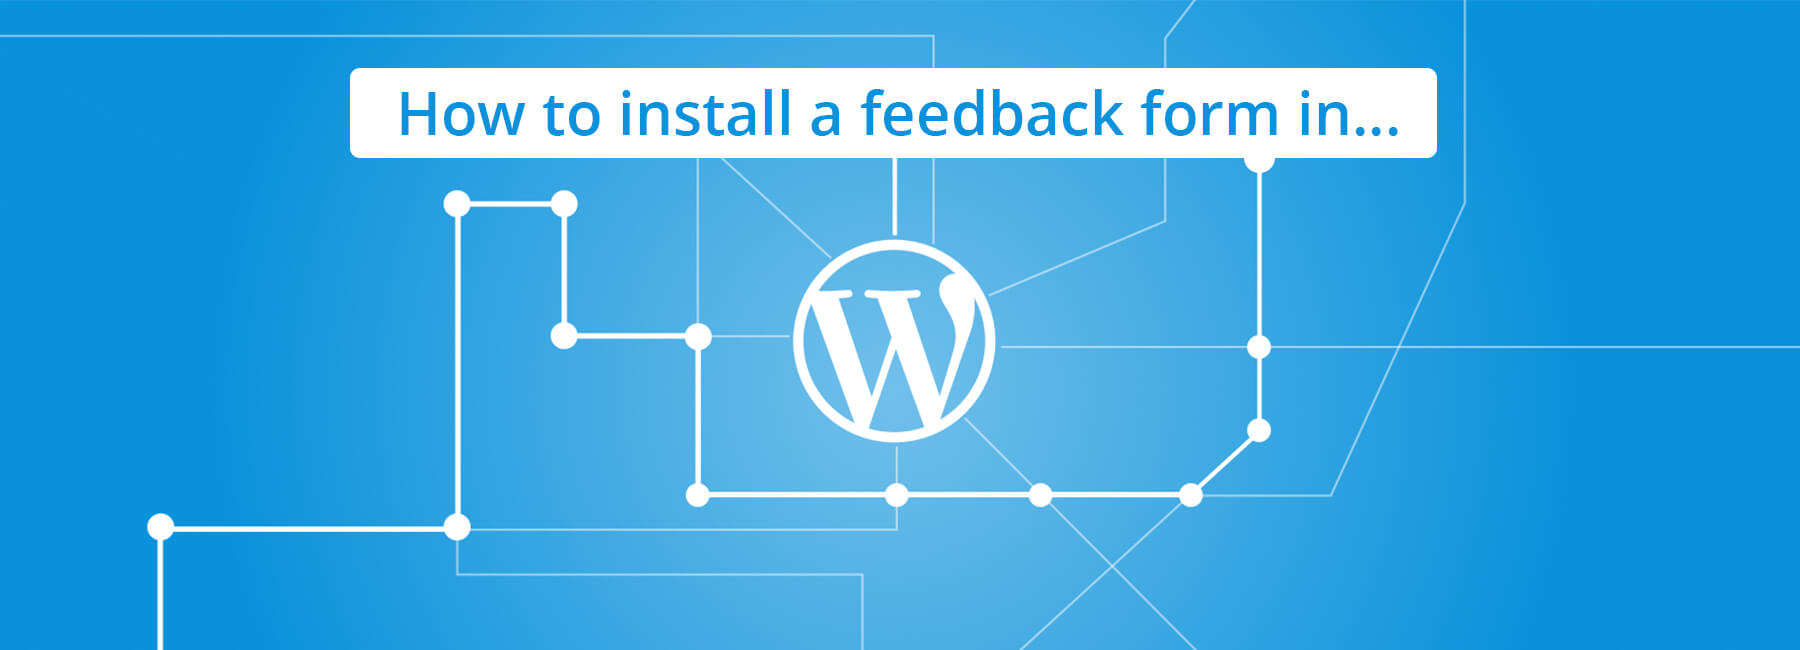 How to install a feedback form in WordPress